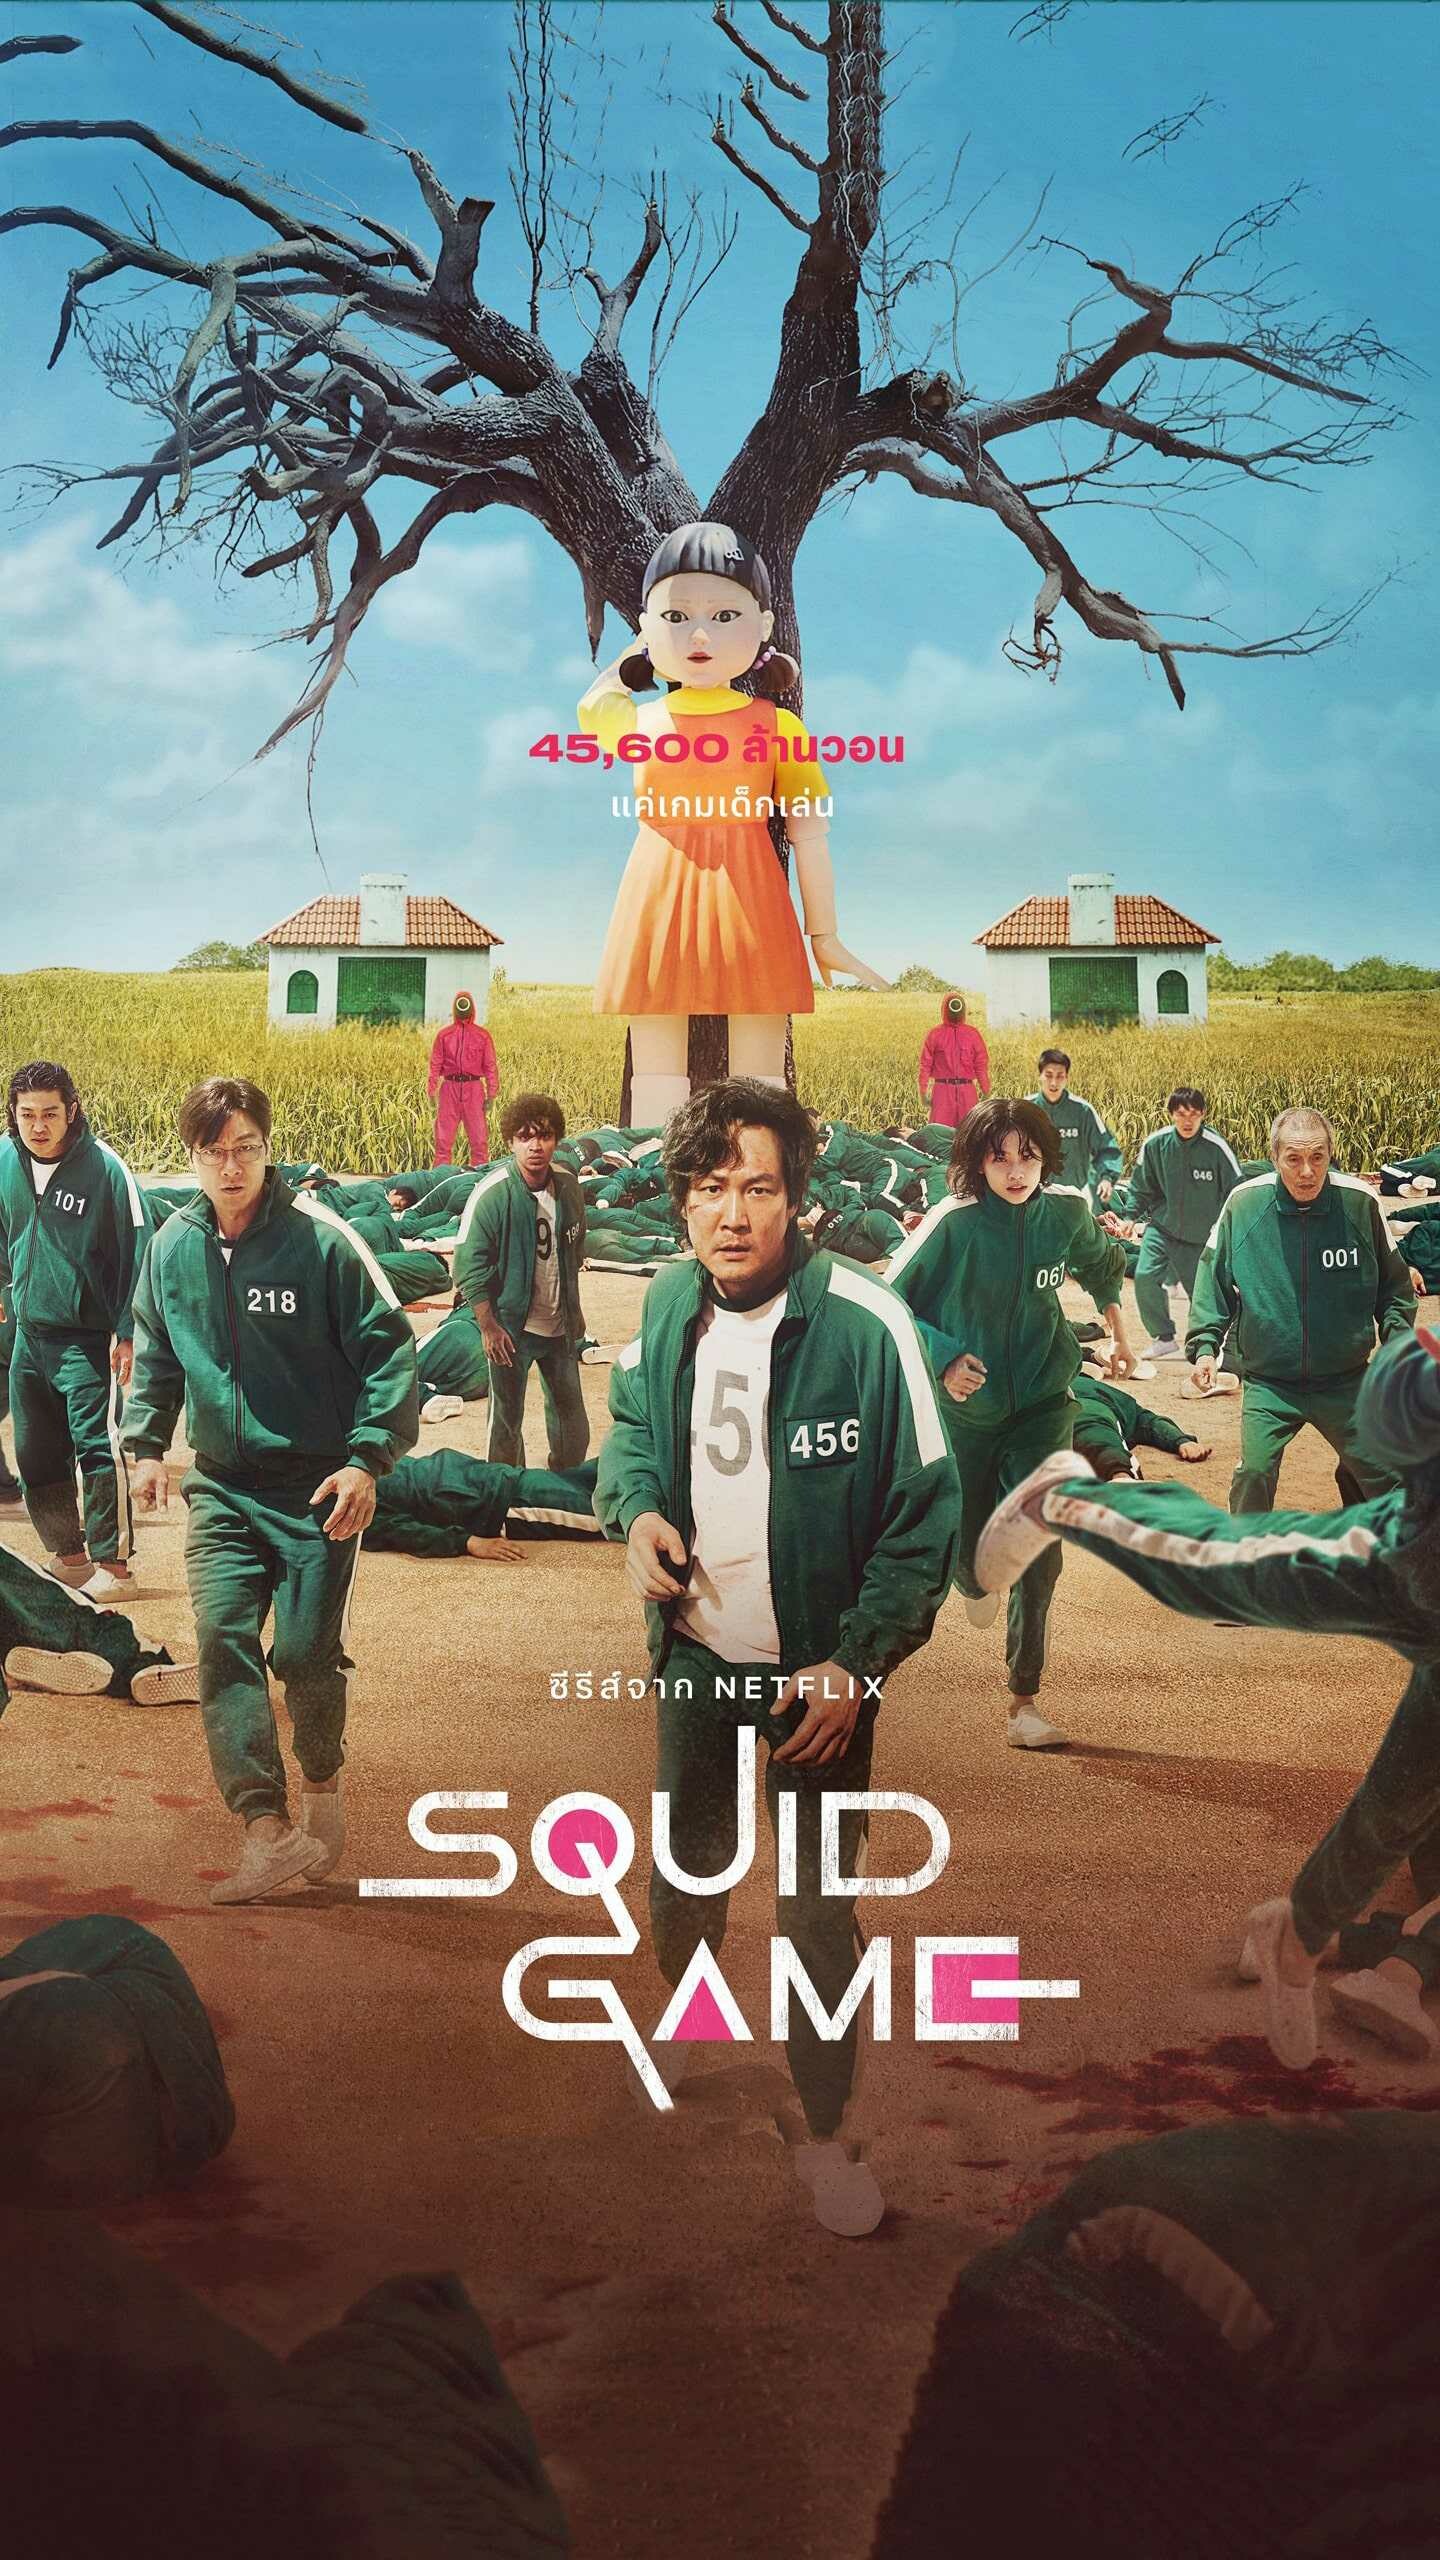 Netflix: Squid Game, A South Korean survival drama television series created by Hwang Dong-hyuk for the streaming service. 1440x2560 HD Wallpaper.